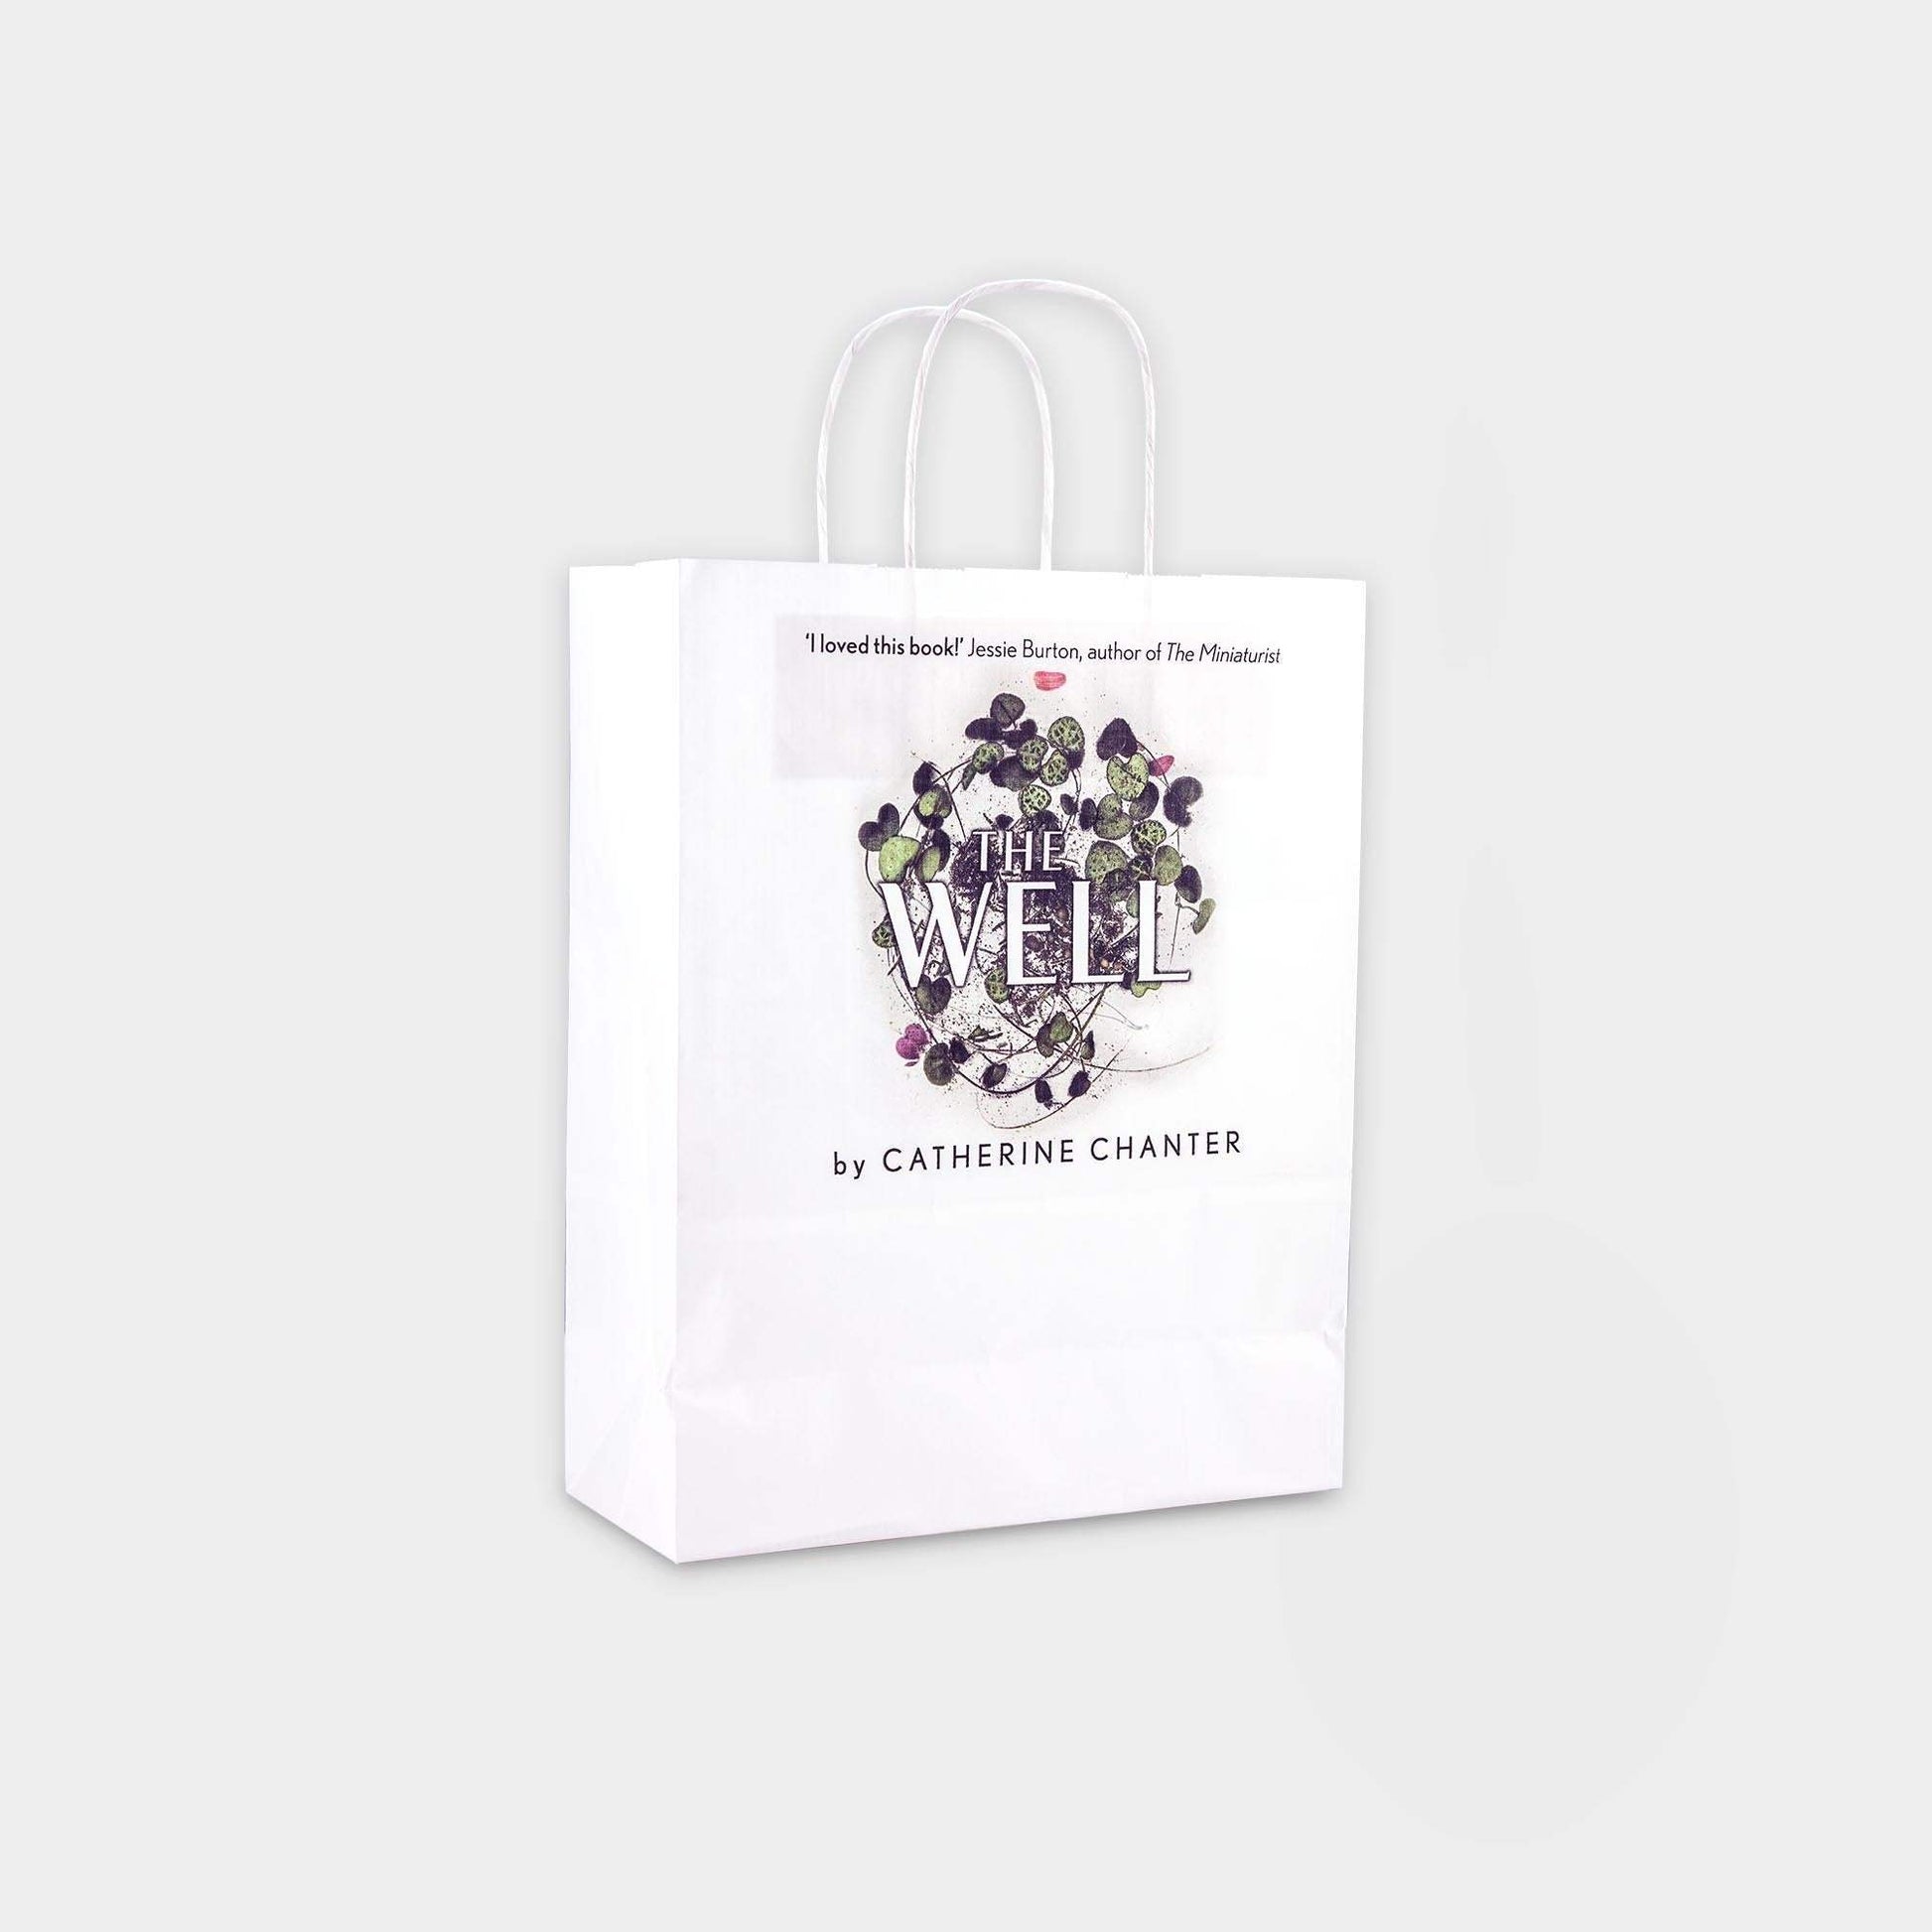 A4 Kraft Paper Bag Sustainable - One colour print - Promotions Only Group Limited